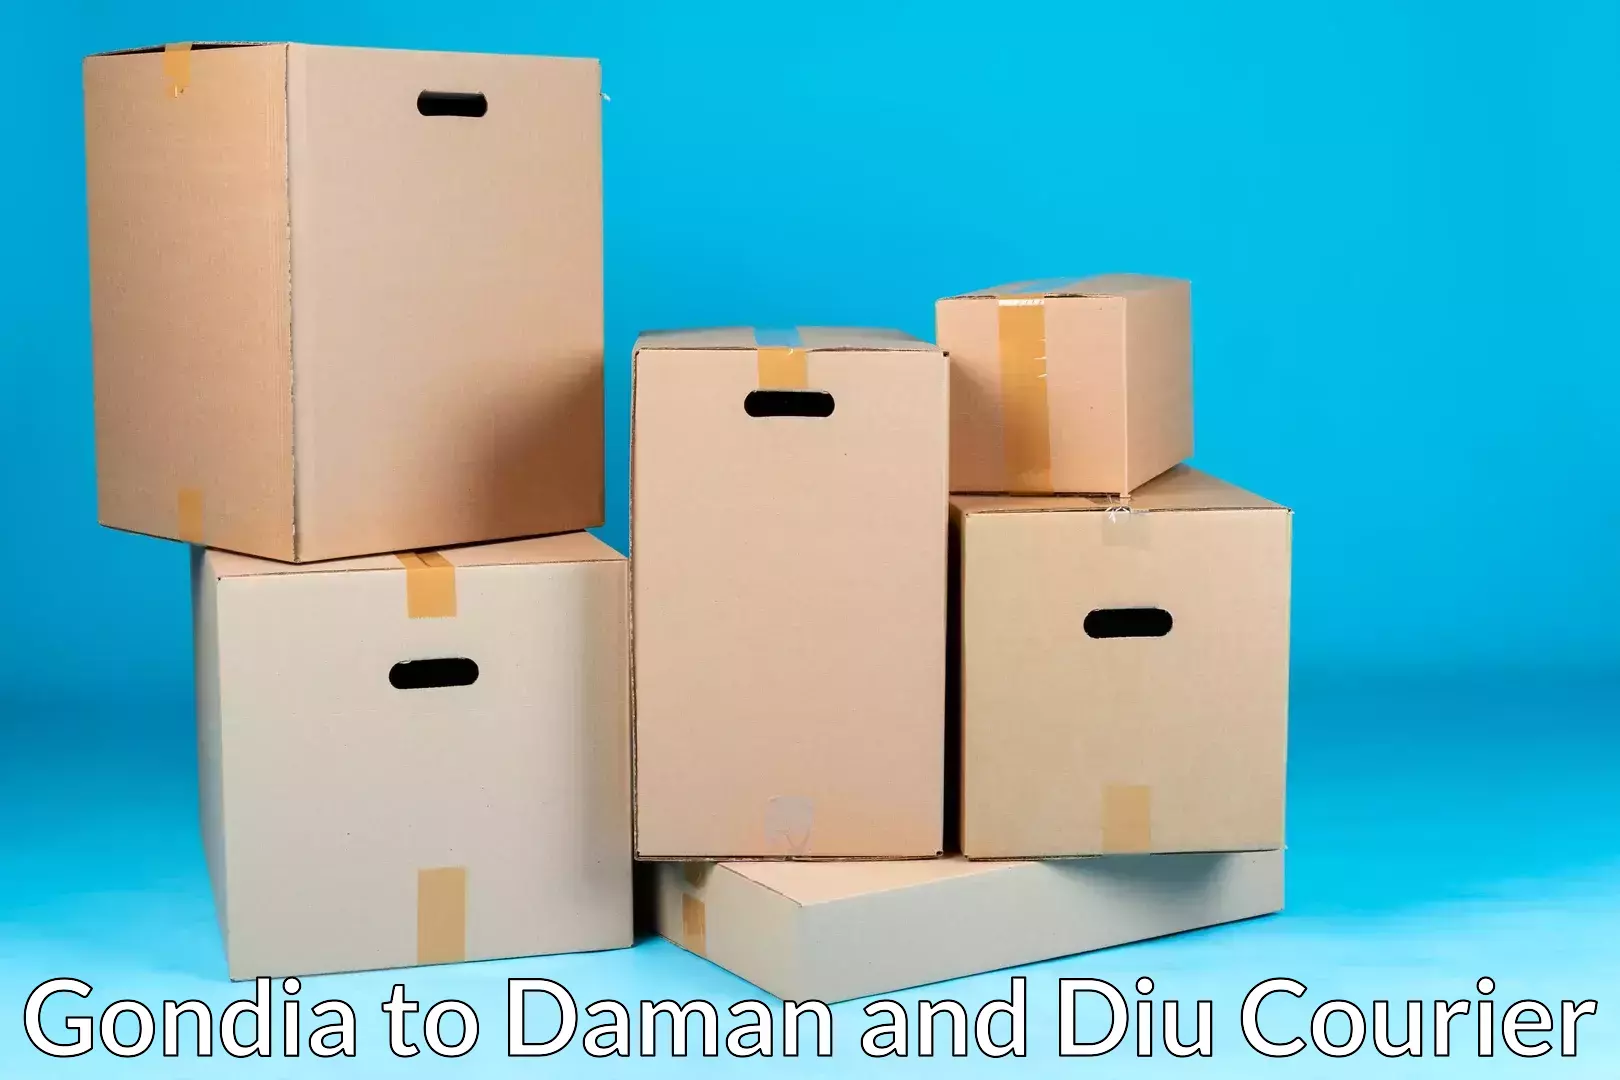 Trusted relocation experts Gondia to Daman